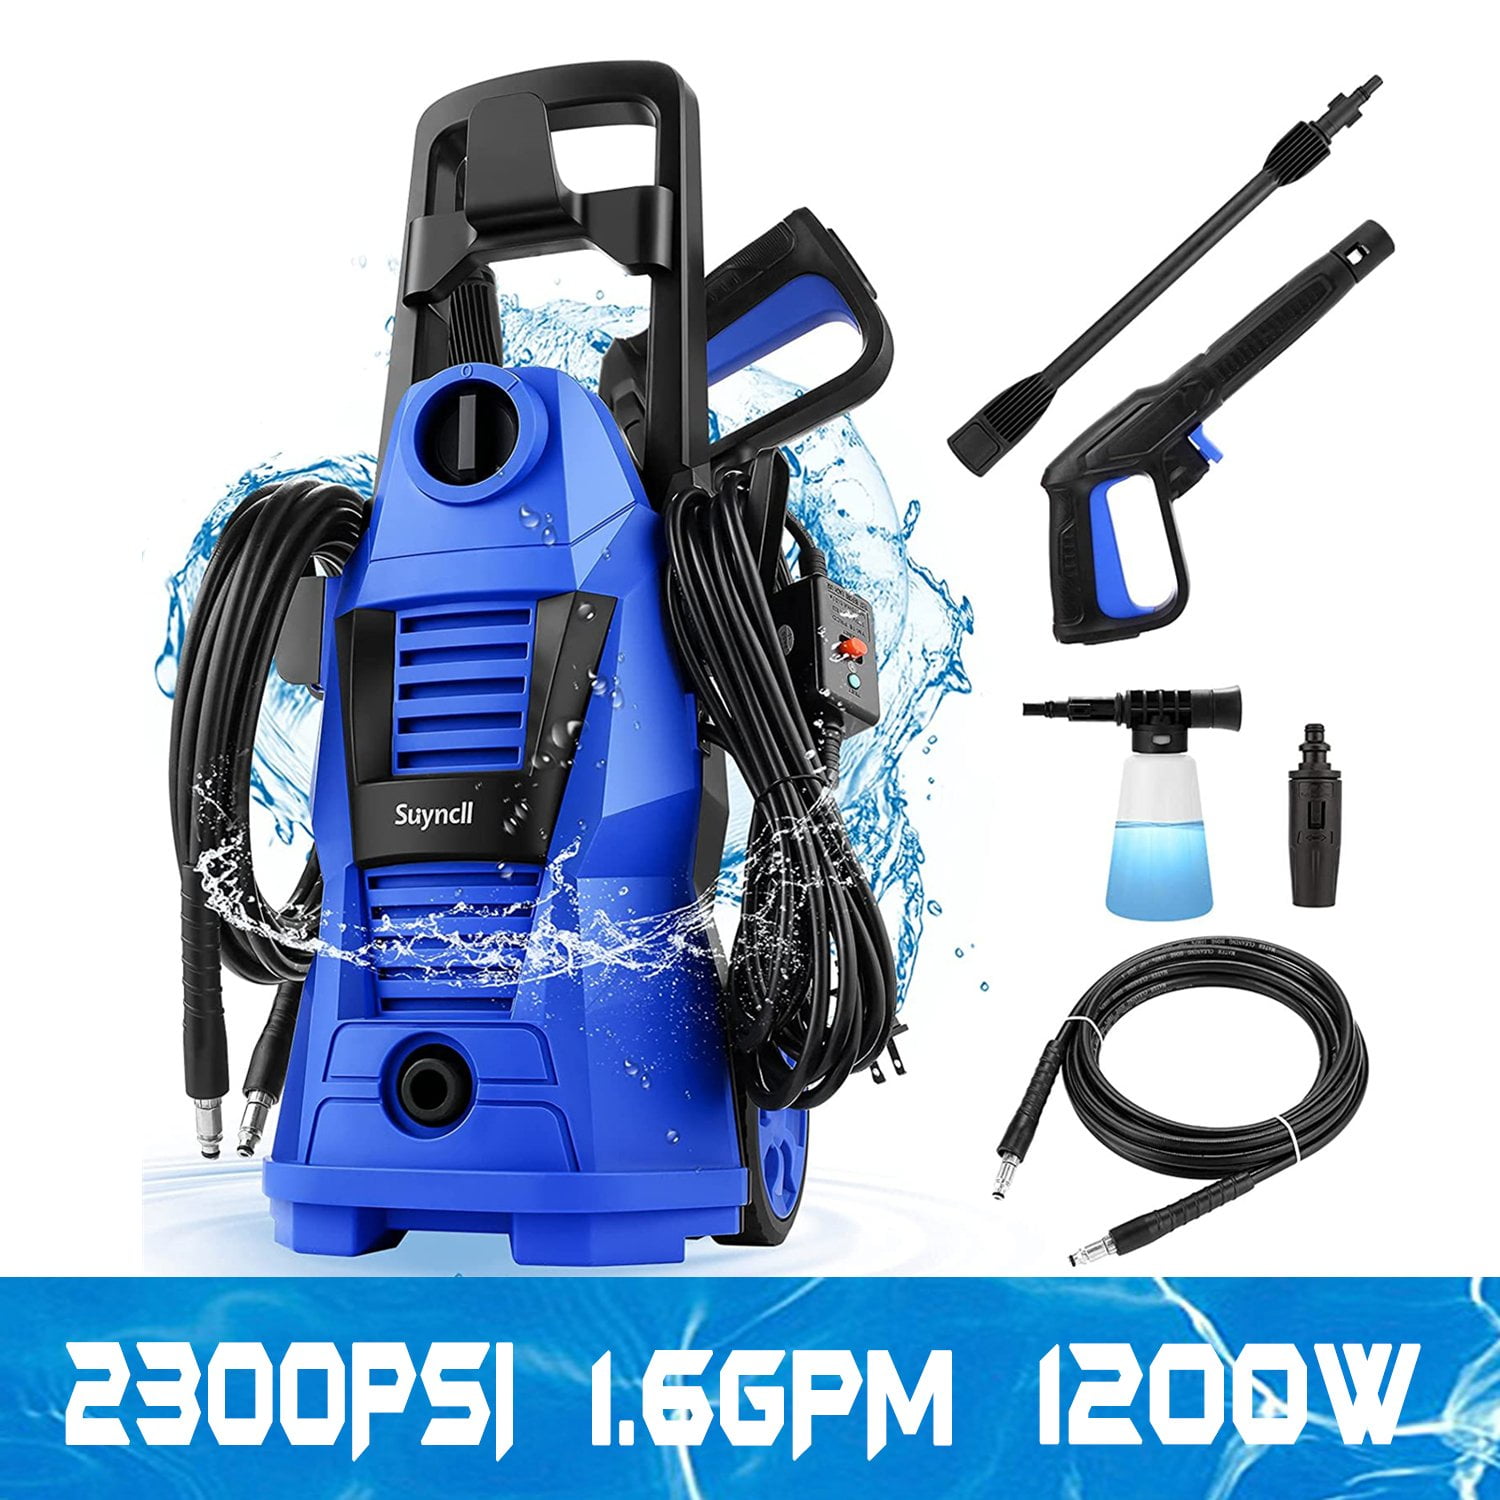 Blue Suyncll 3800 PSI 2.8GPM Electric Pressure Washer Electric Power Washer with Soap Bottle